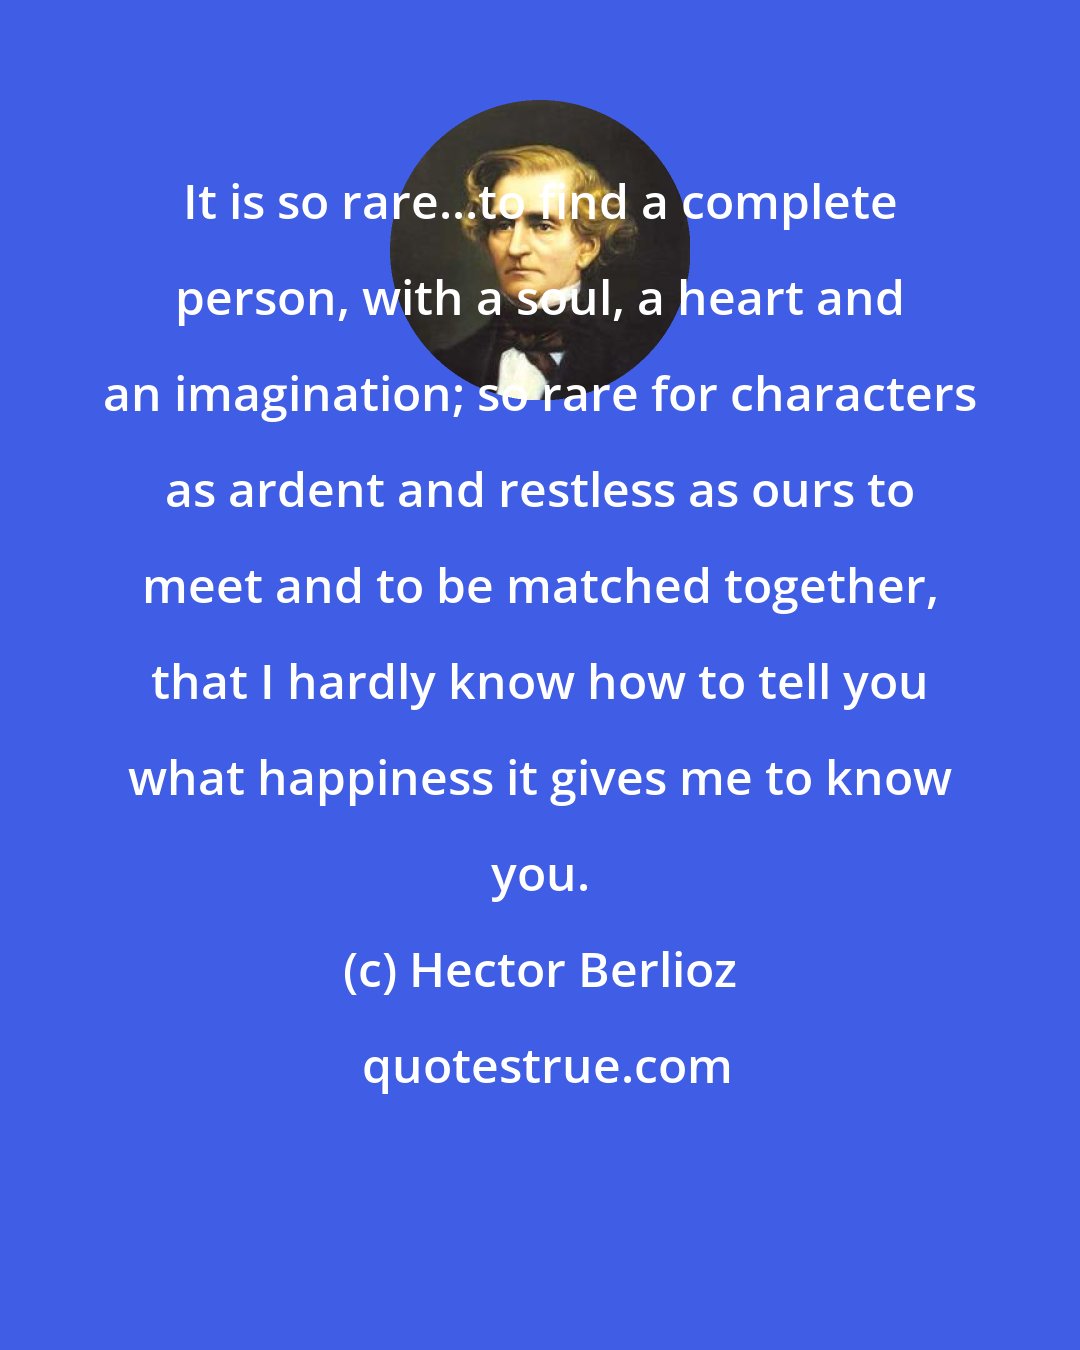 Hector Berlioz: It is so rare...to find a complete person, with a soul, a heart and an imagination; so rare for characters as ardent and restless as ours to meet and to be matched together, that I hardly know how to tell you what happiness it gives me to know you.